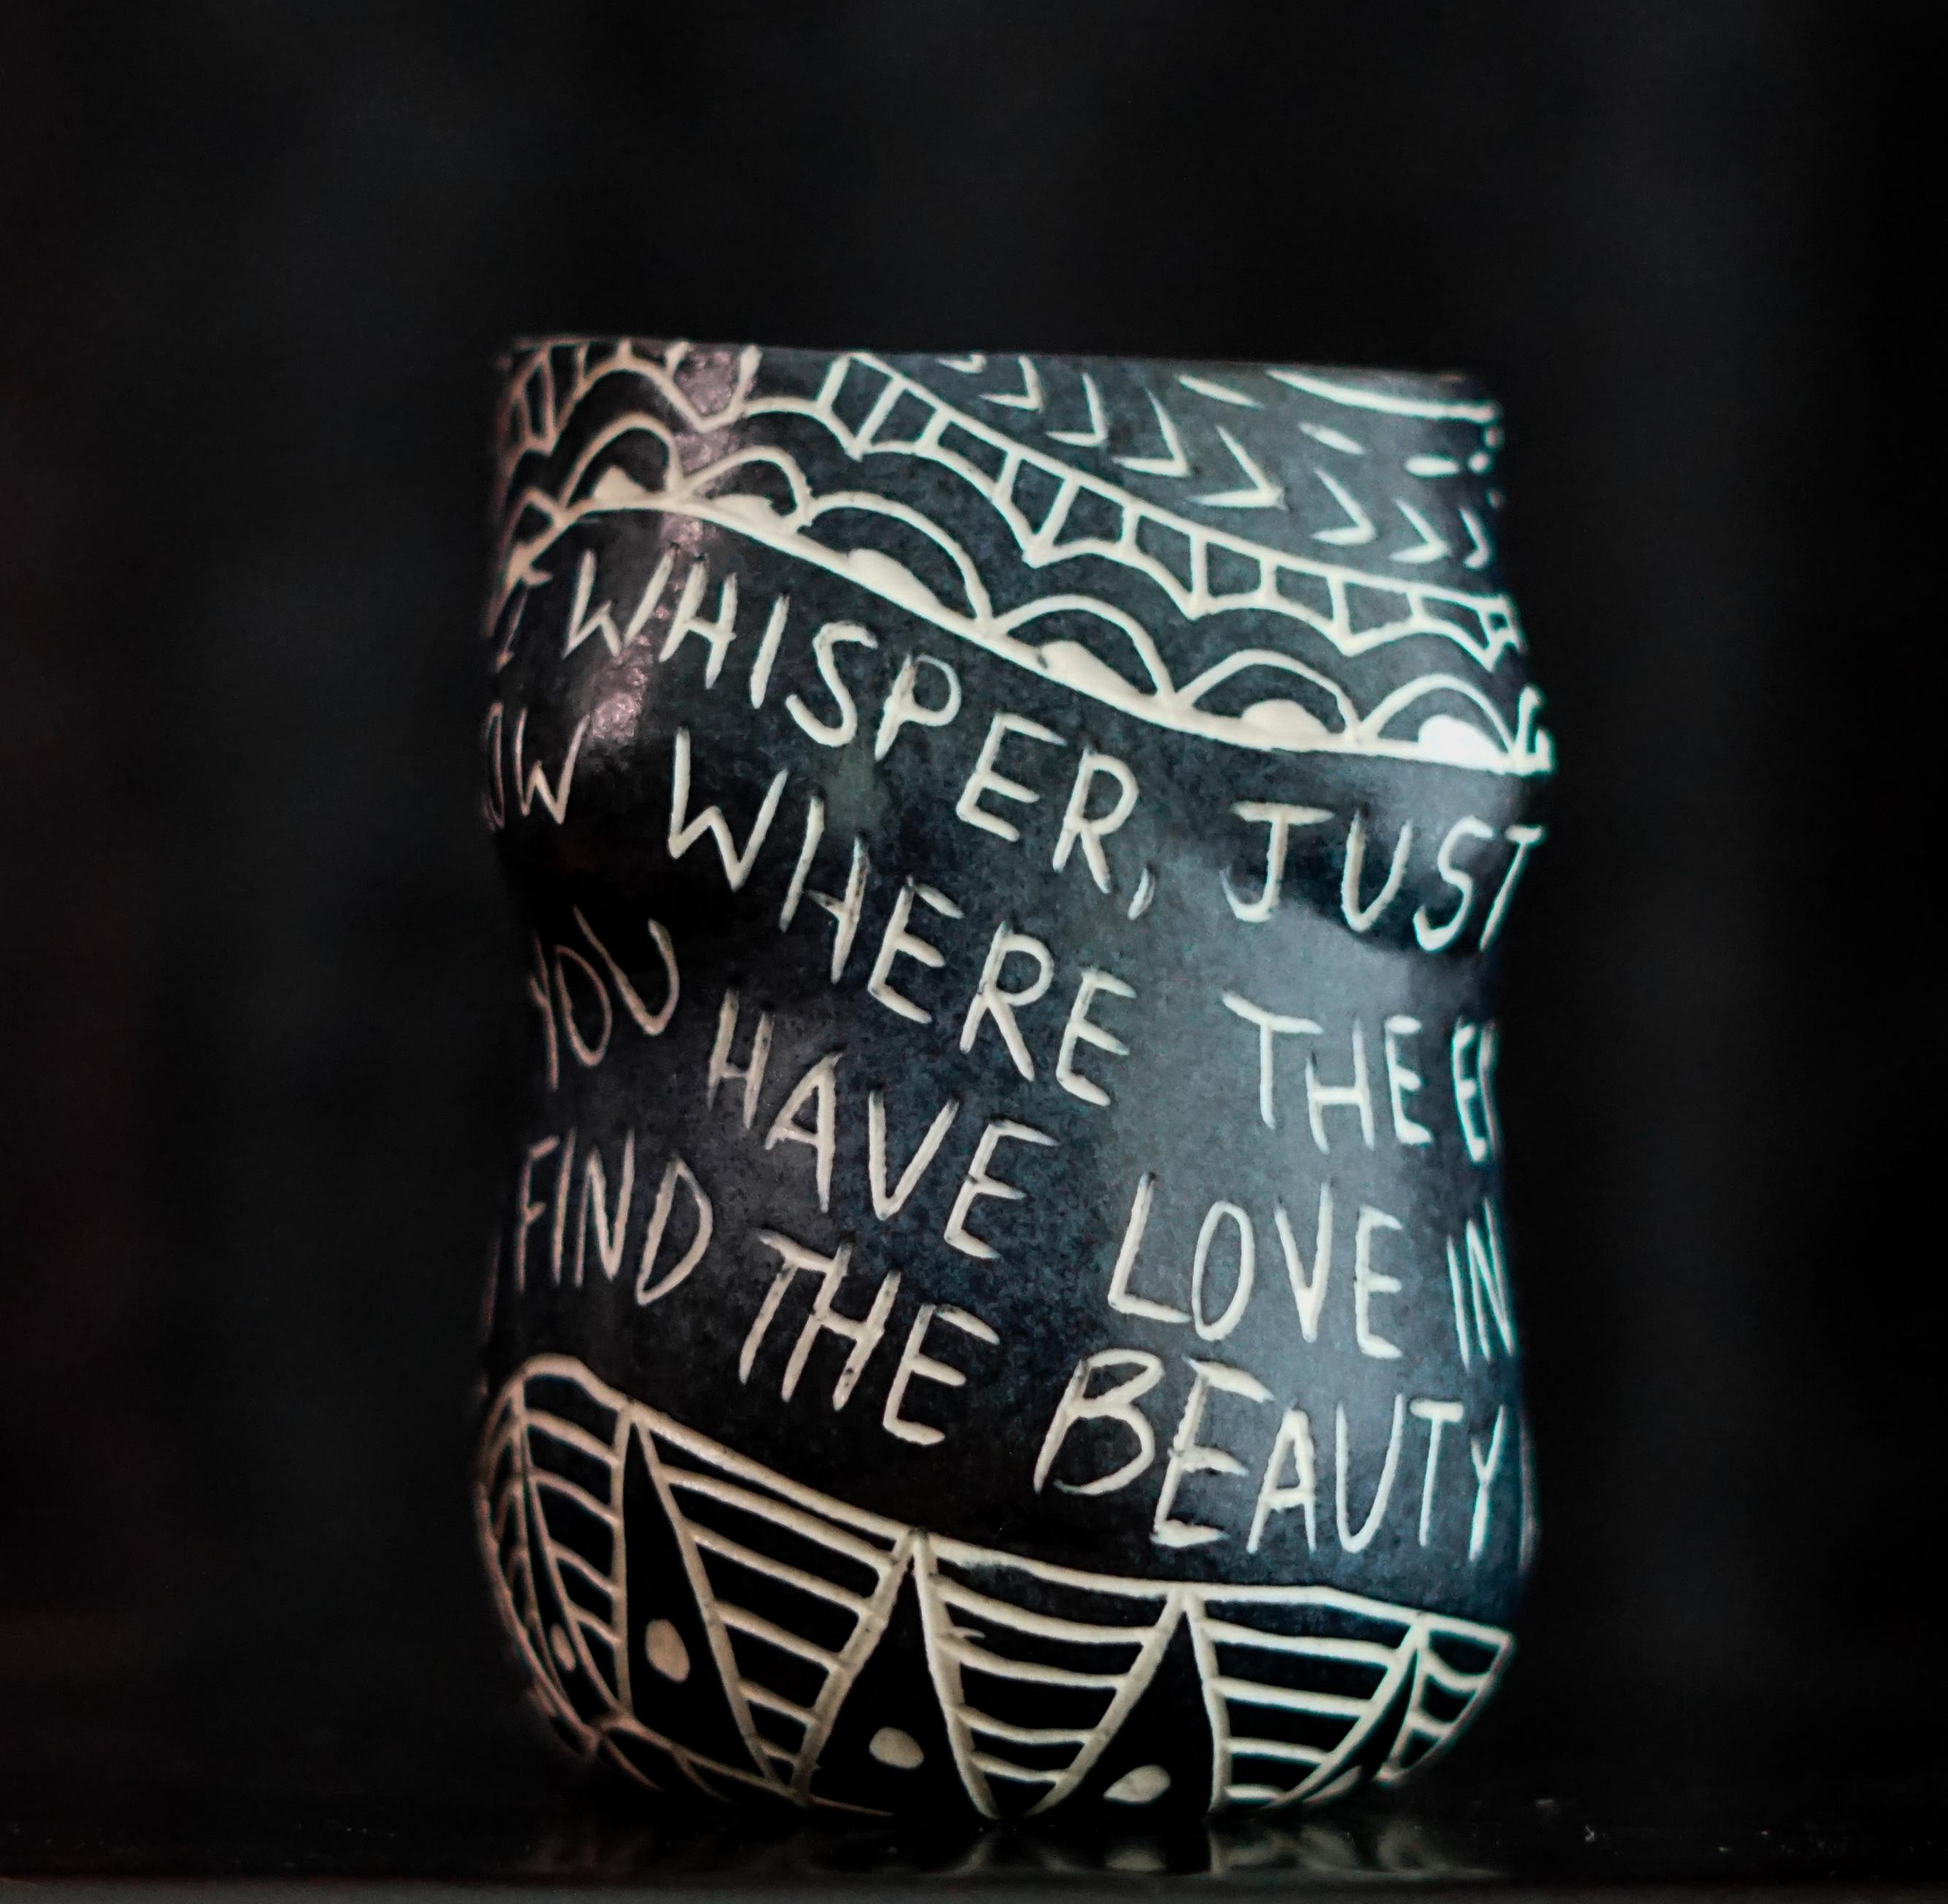 I Whisper Just to You, and Some Days We are Both at Sea Diptych Porcelain cup  - Sculpture by Alex Hodge